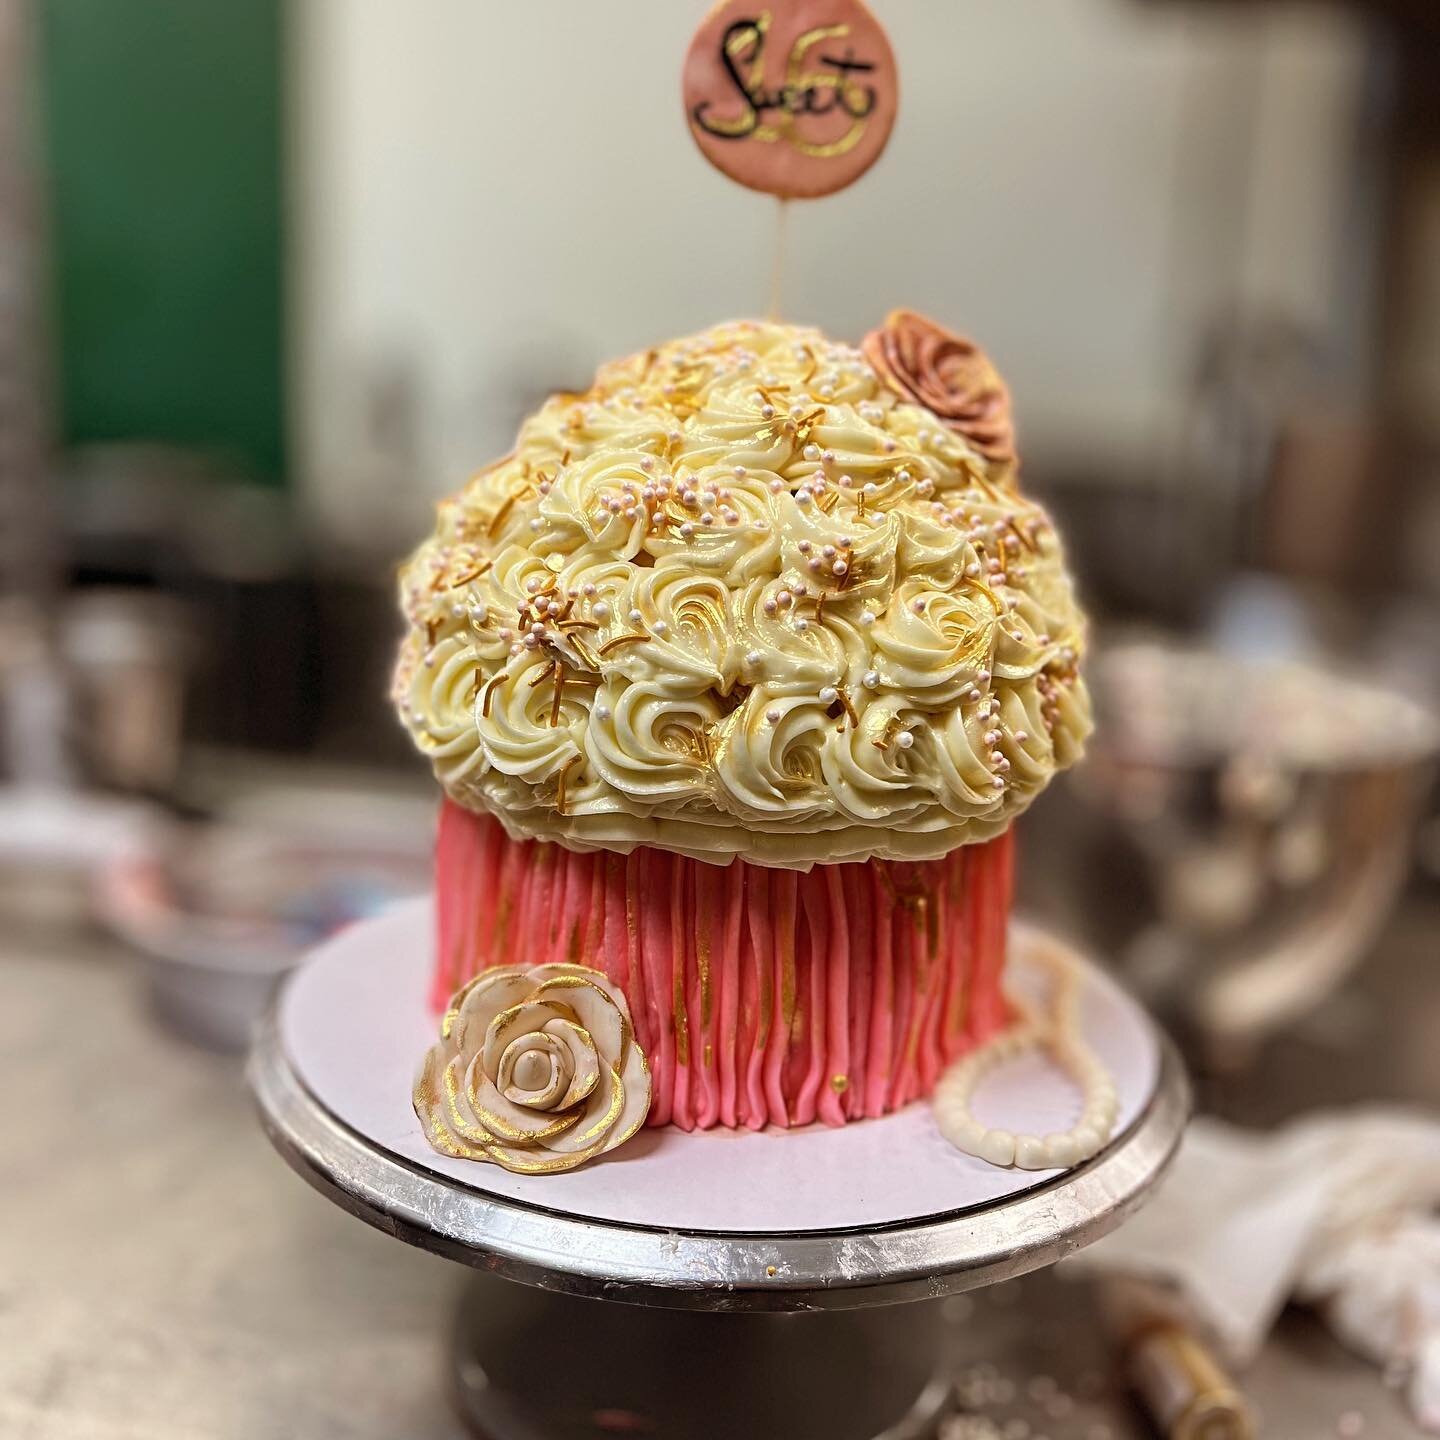 😱 Look at the Sweet 16 giant cupcake going out today!!! We&rsquo;re in love 😍😍😍😍

#cakelovers #customcakes #benandbean #cafe localbakery #brunswickcountync #oib #ncfoodie #oceanislebeachnc #sunsetbeachnc #supportlocalbusinesses